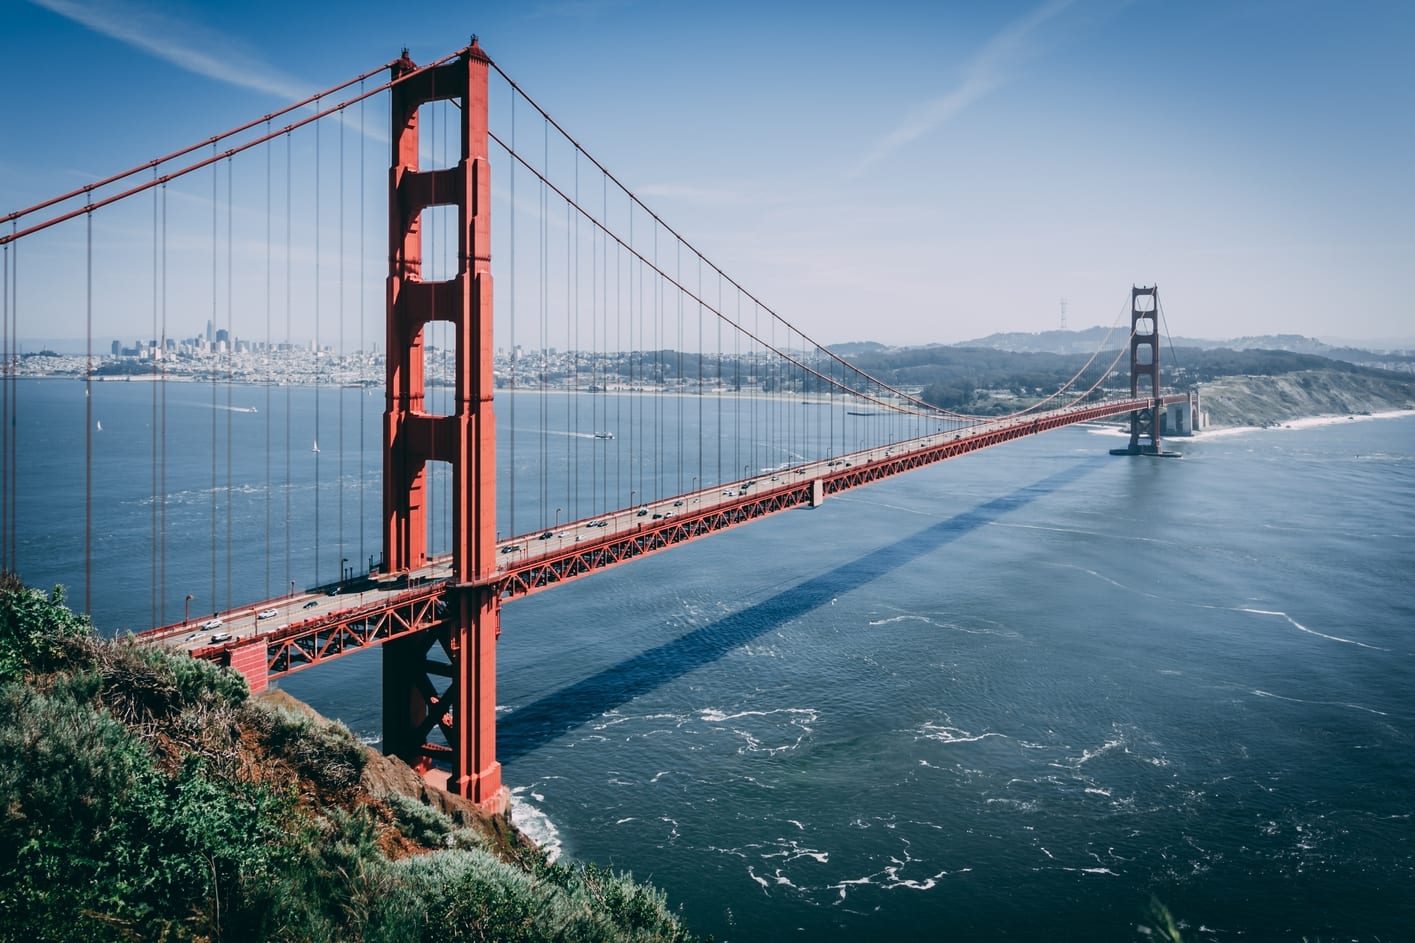 Golden Gate, the most famous bridge to visit in San Francisco